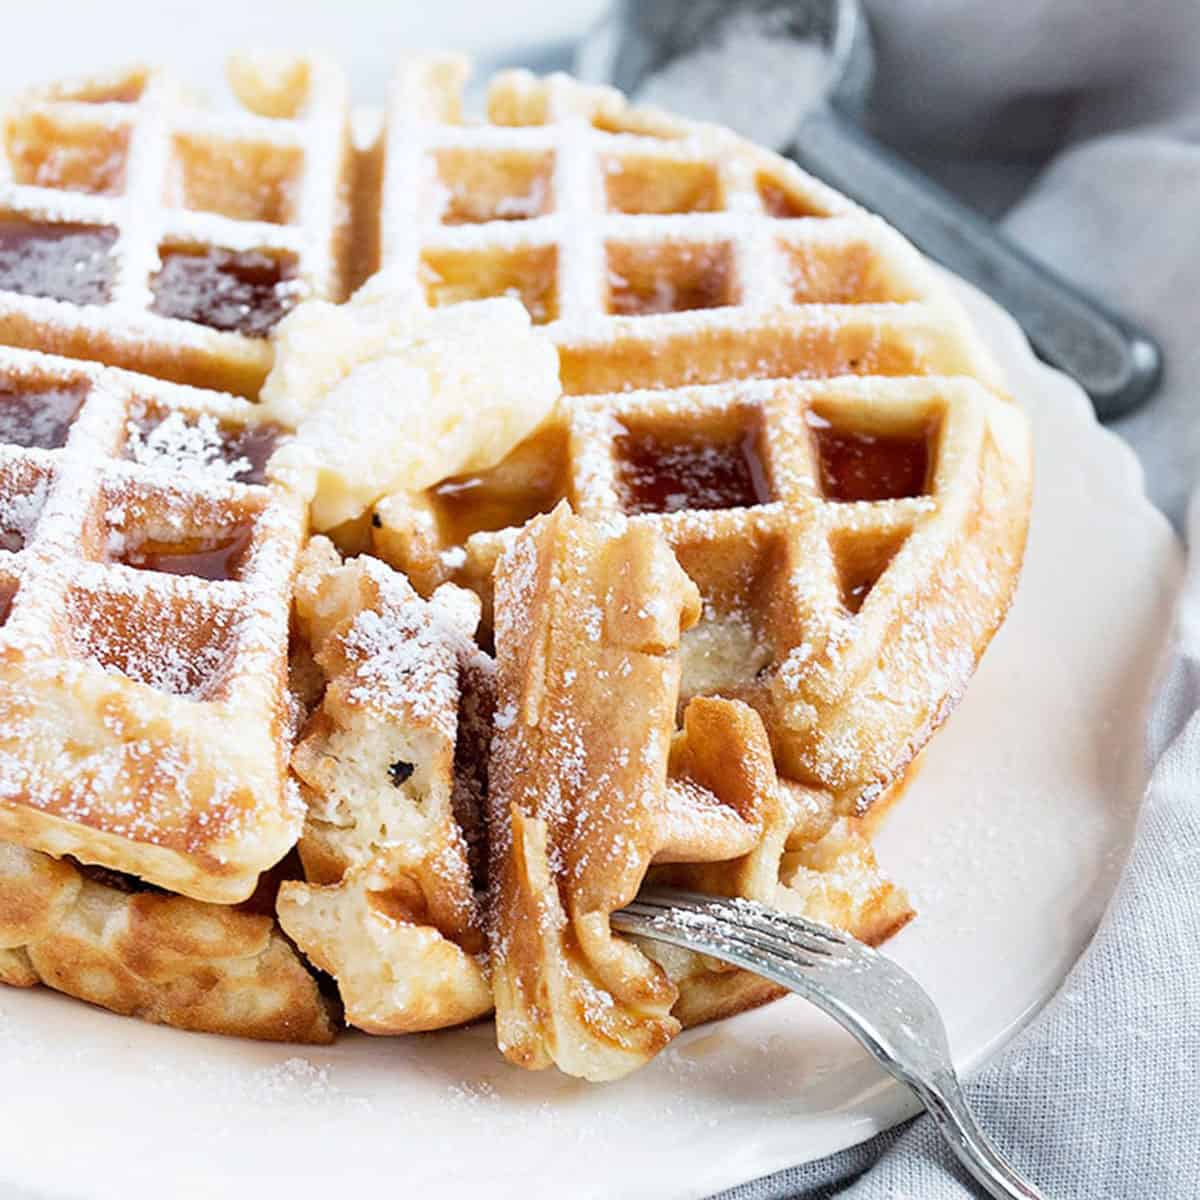 Basic waffles recipe (from 6 months+)